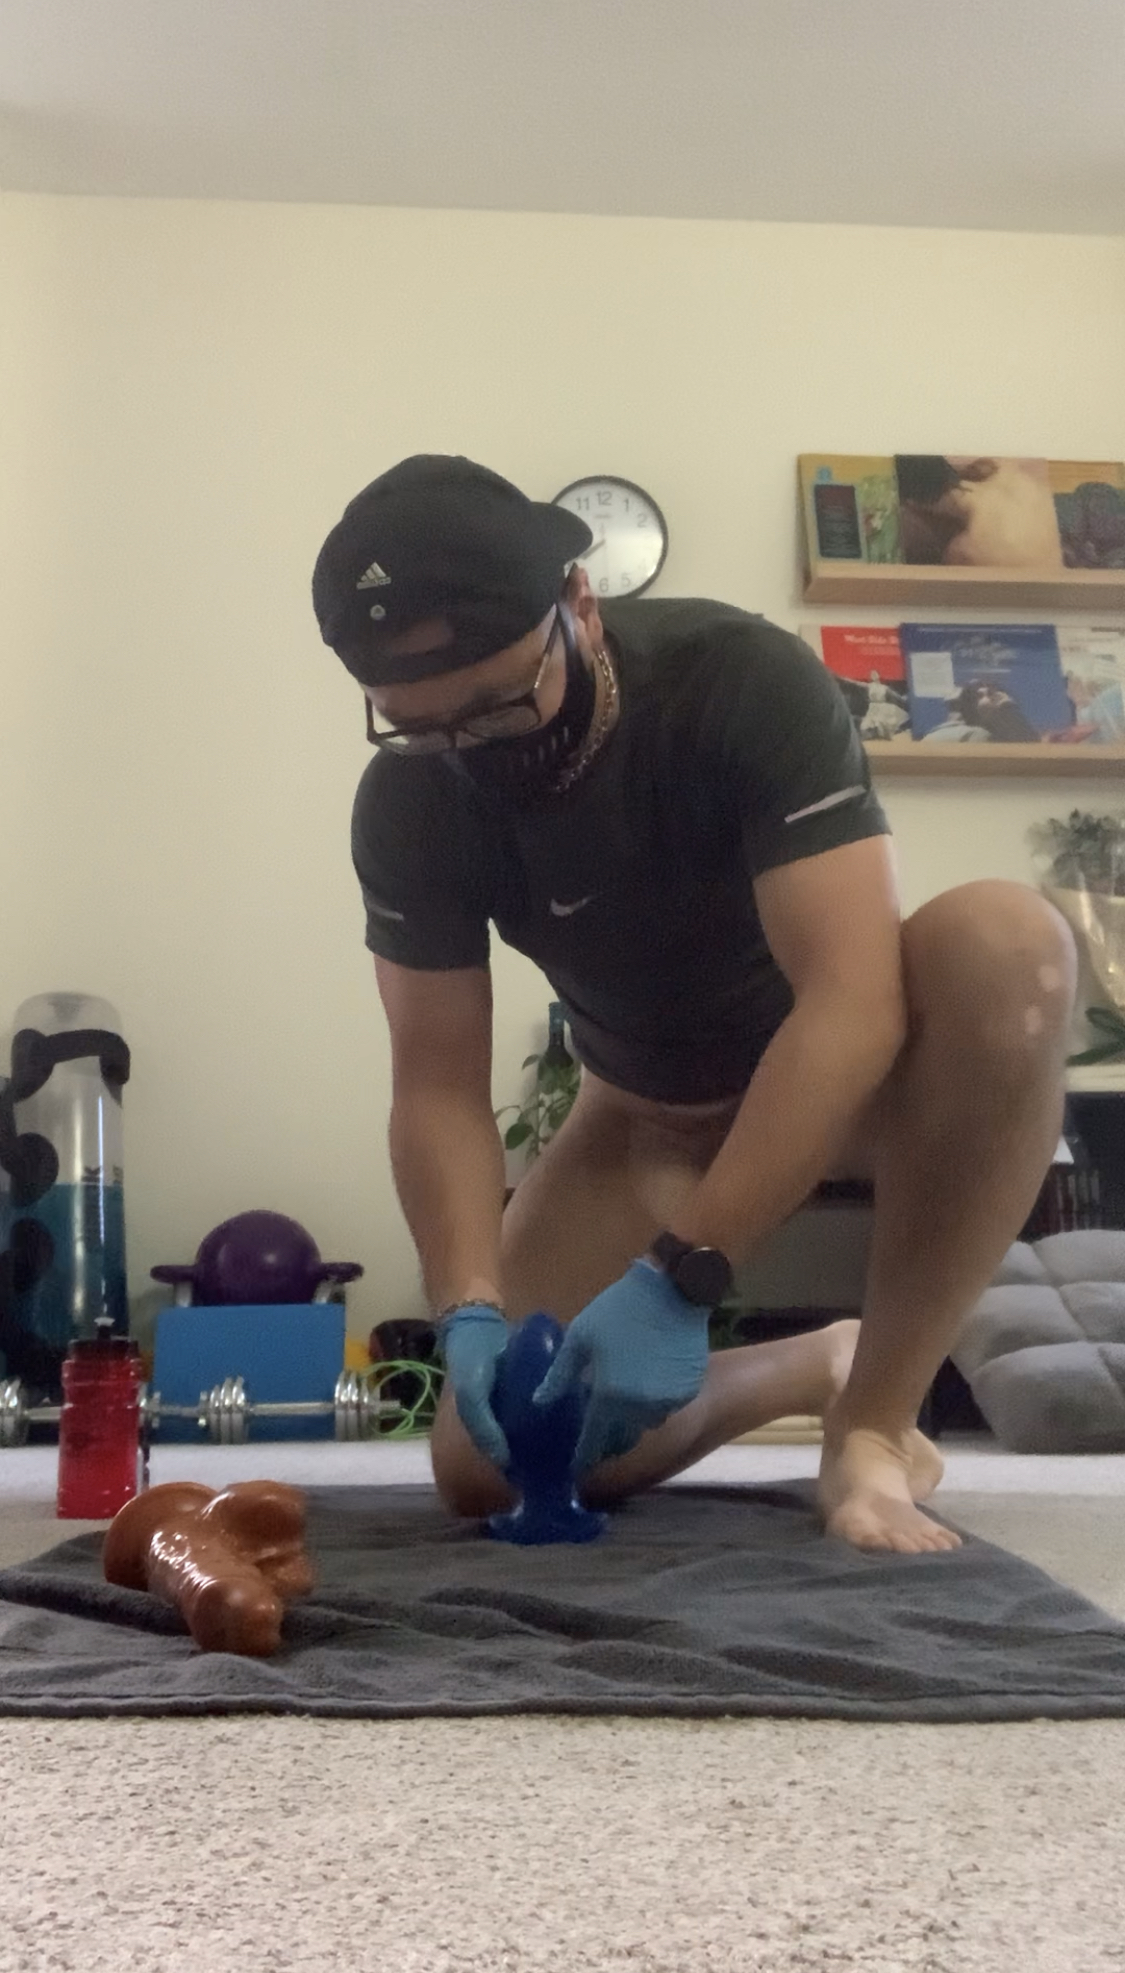 sub boy’s first challenge of large Topped Toy